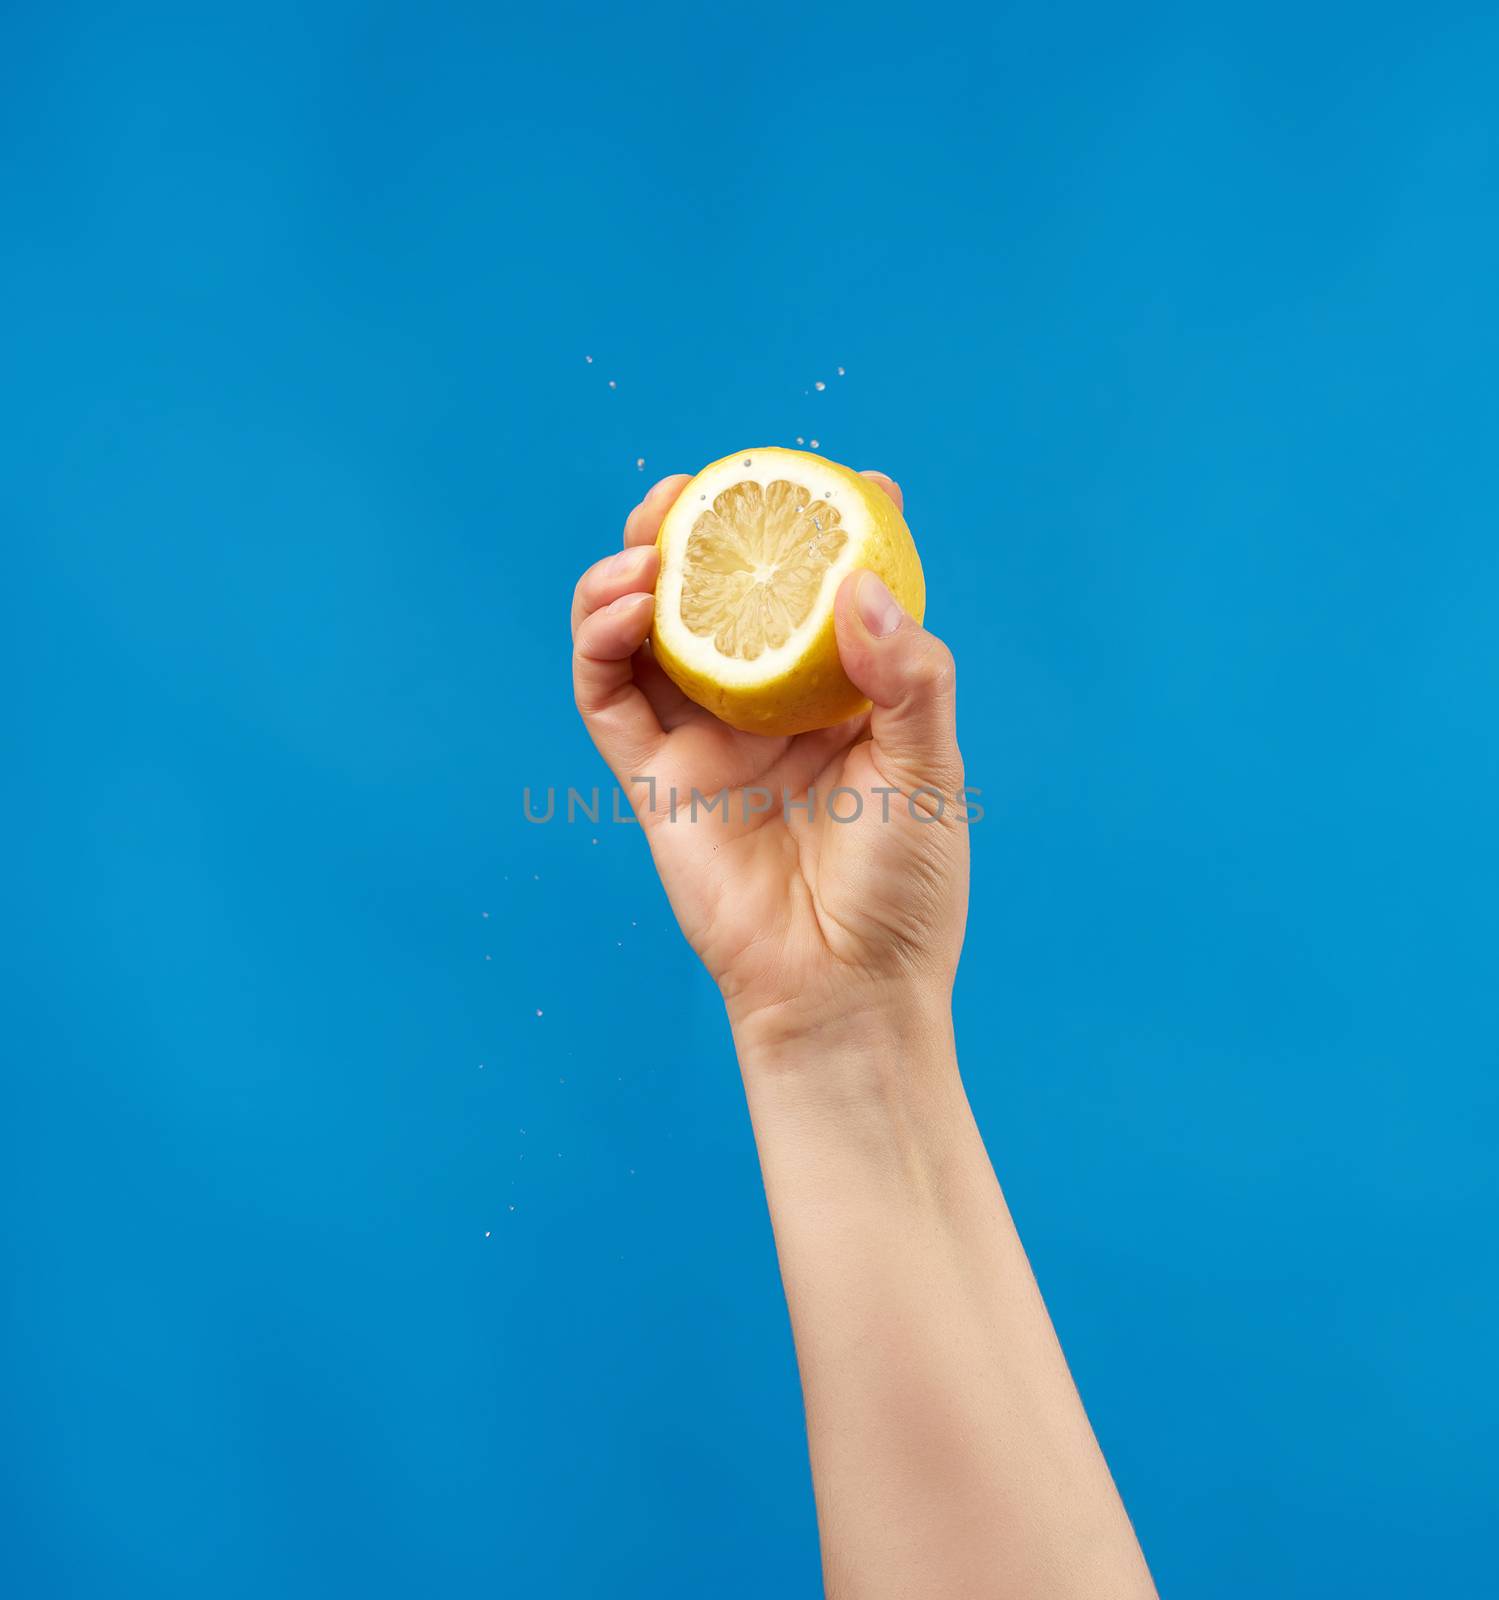 female hand holds half a yellow lemon and squeezes it on a blue background, splashes fly to the sides